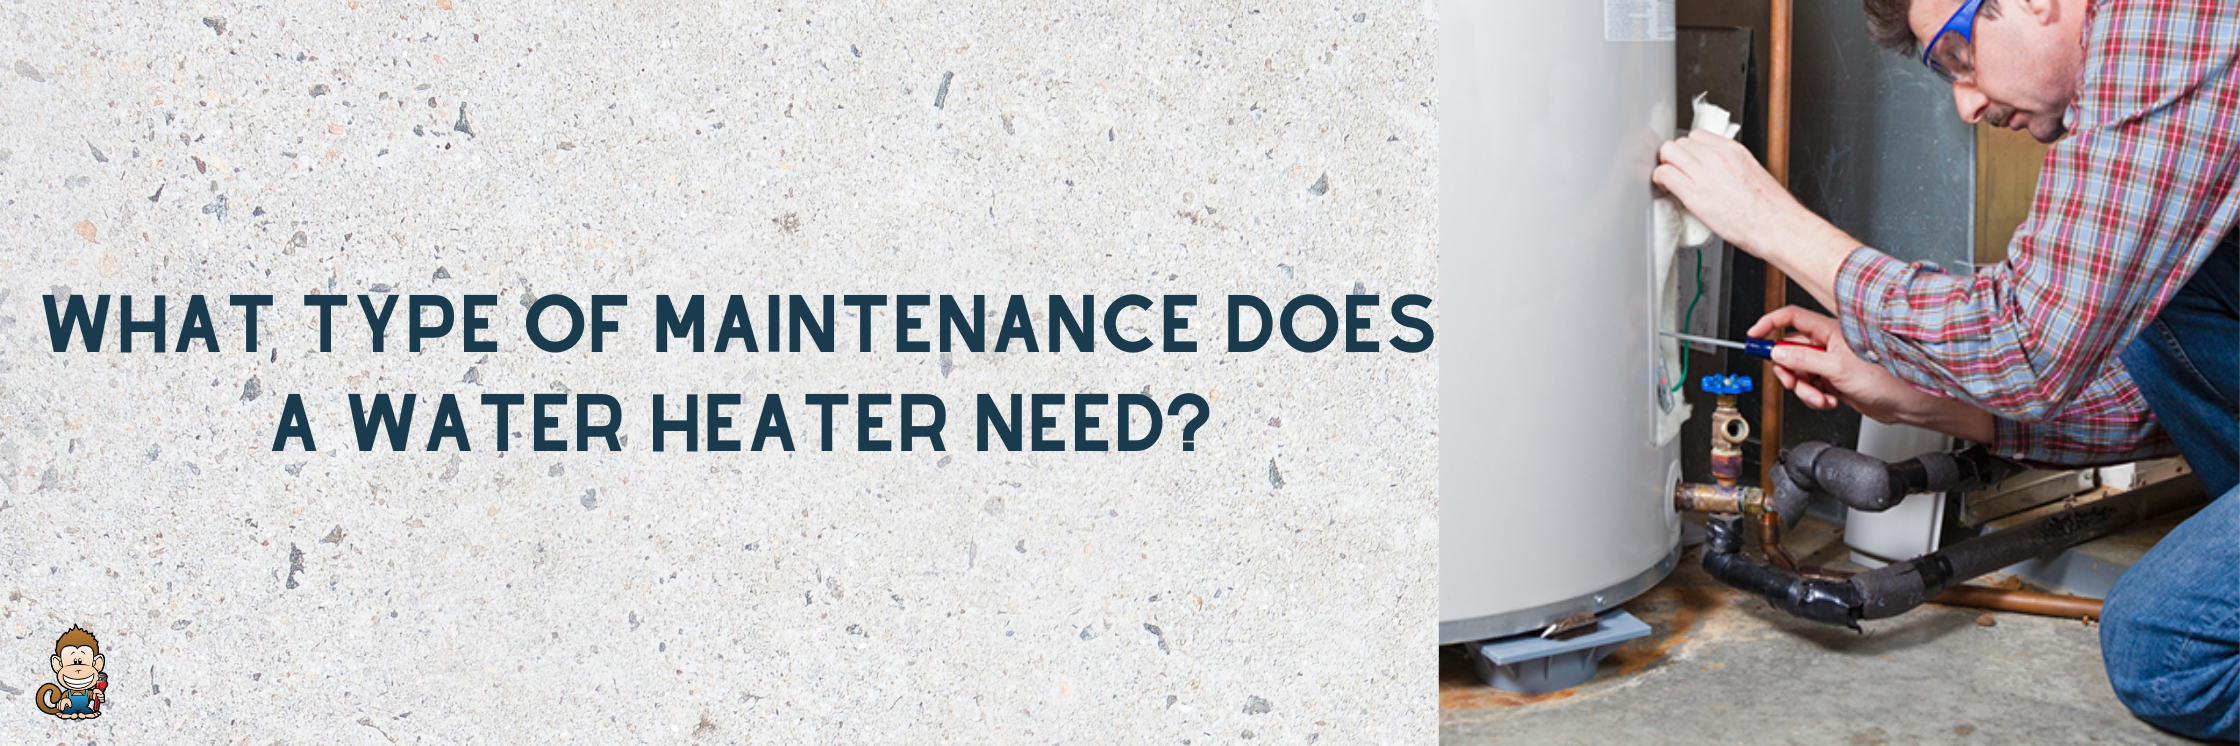 What Type of Maintenance Does a Water Heater Need?